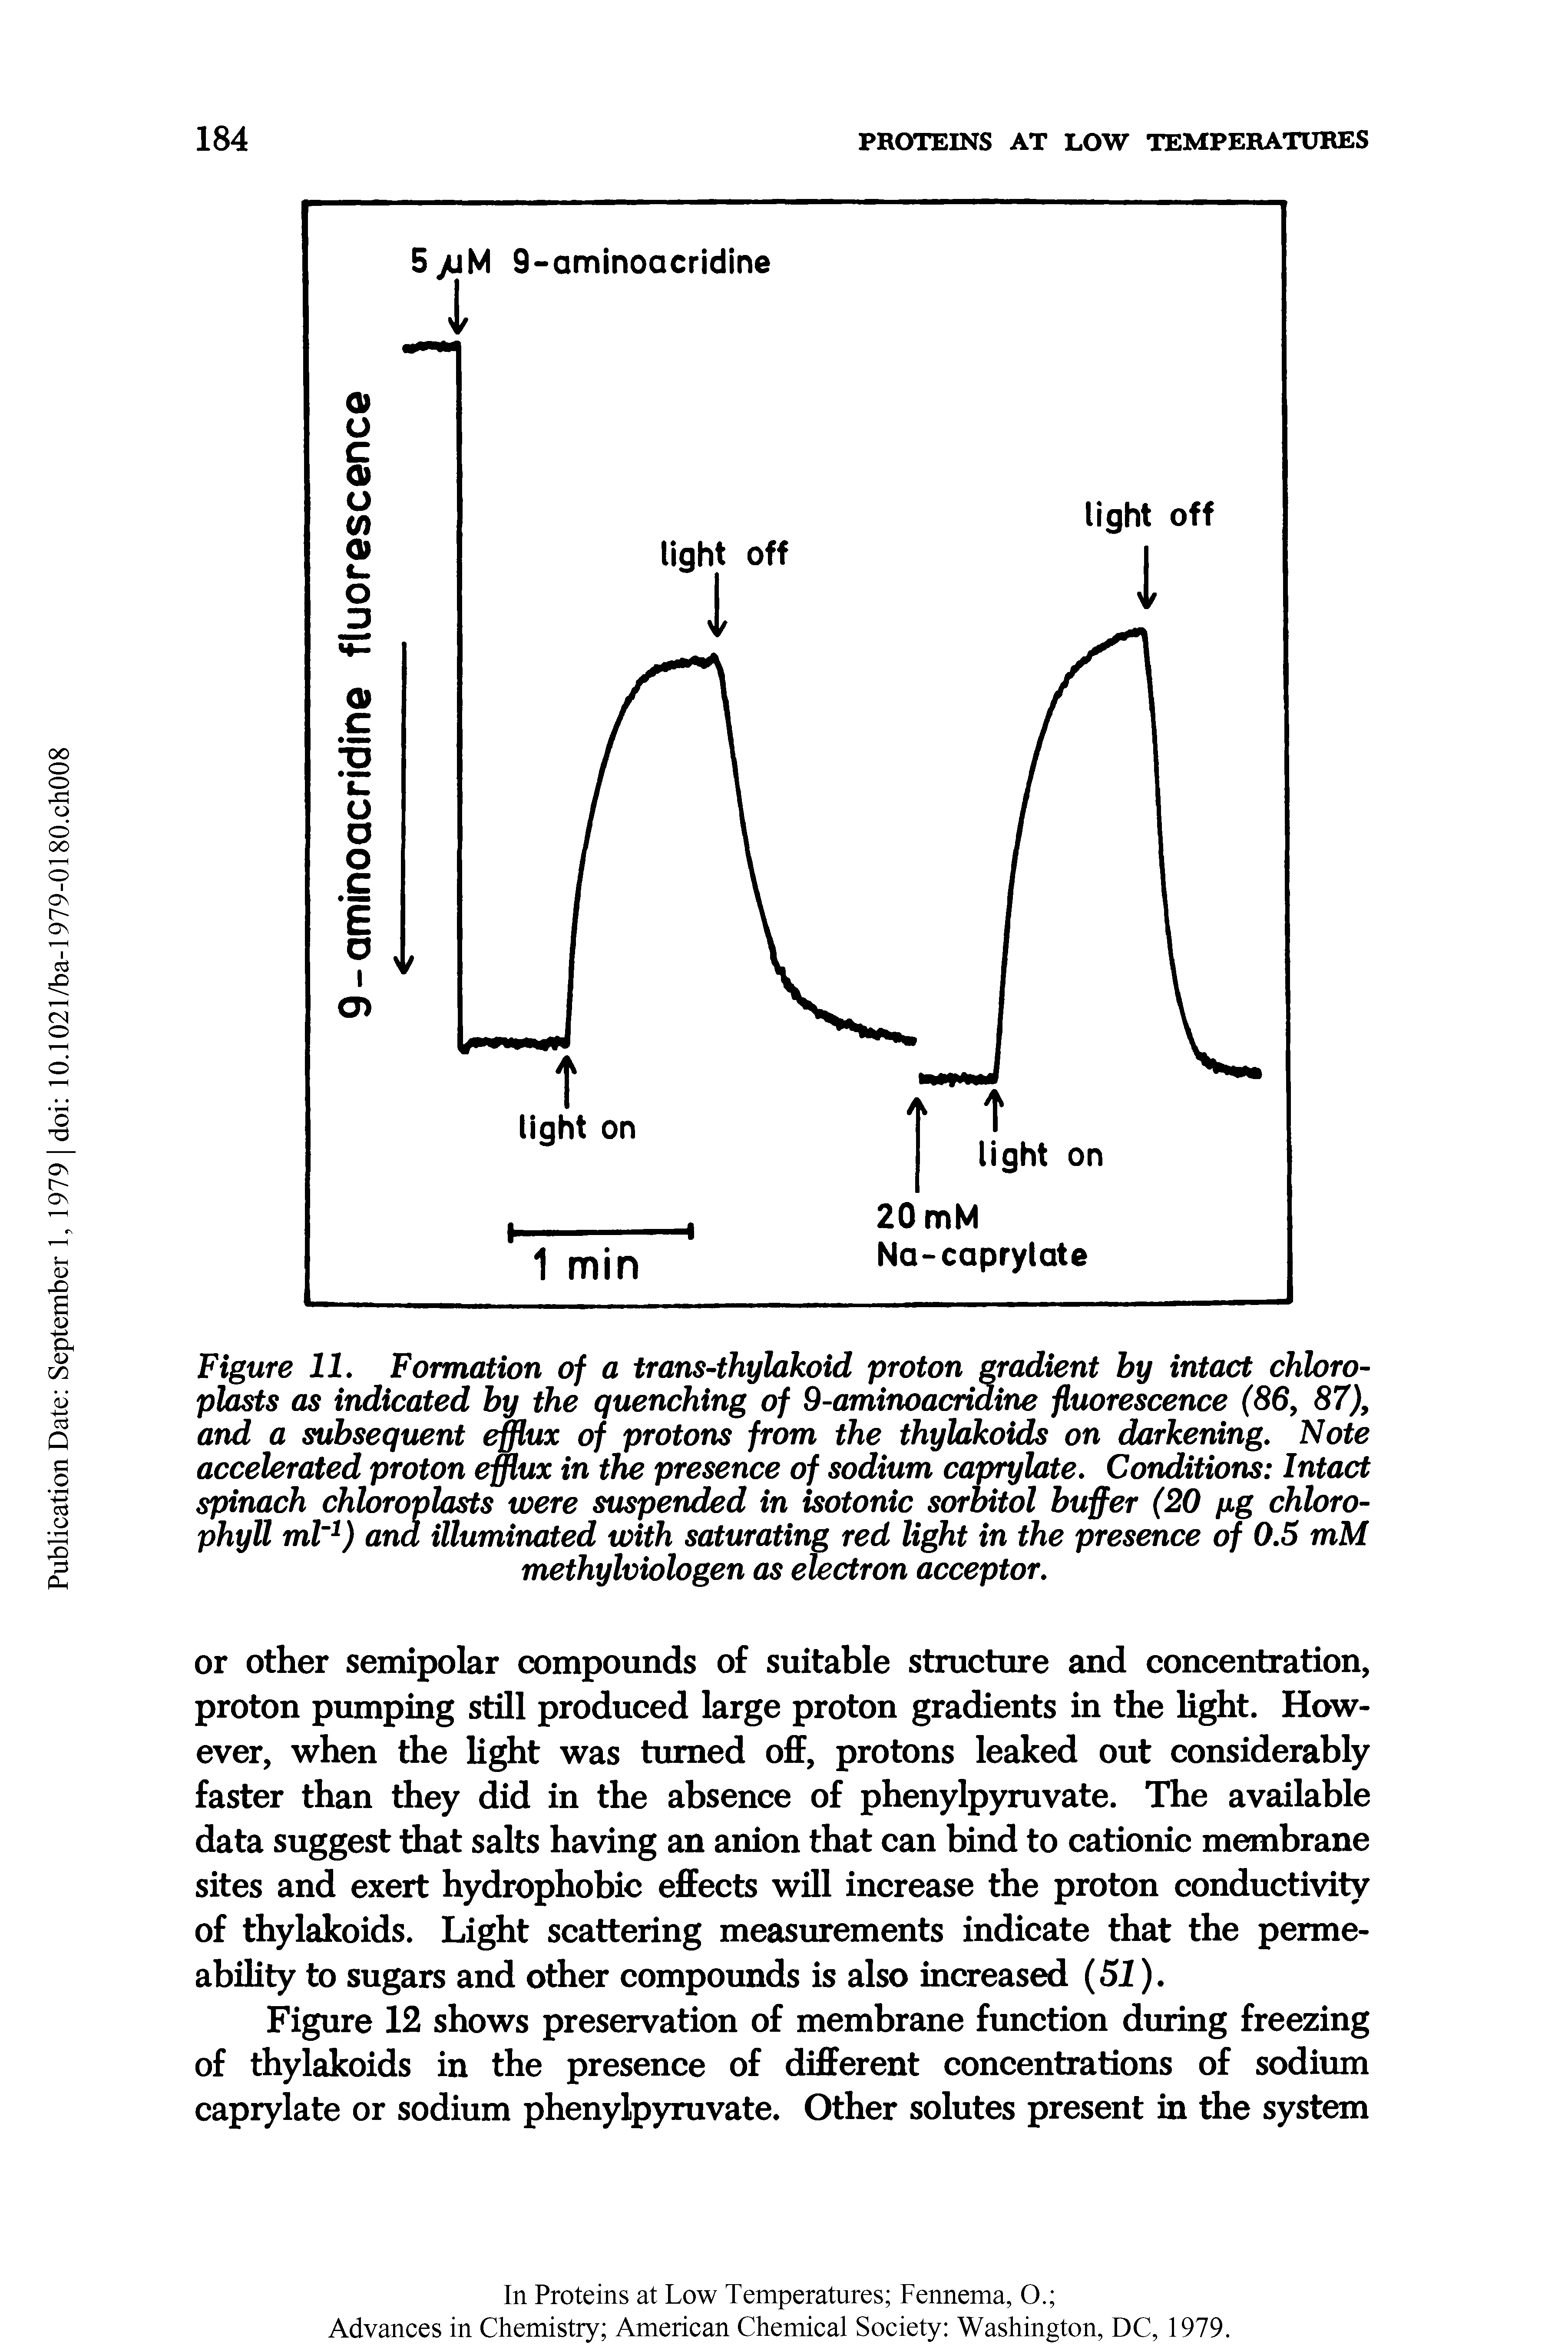 Figure II. Formation of a trans-thylakoid proton gradient by intact chloro-plasts as indicated by the quenching of 9-aminoacnaine fluorescence (86, 87), and a subsequent efflux of protons from the thylakoids on darkening. Note accelerated proton efflux in the presence of sodium caprylate. Conditions Intact spinach chloroplasts were suspended in isotonic sorbitol buffer (20 /xg chlorophyll ml 1) ana illuminated with saturating red light in the presence of 0.5 mM methylviologen as electron acceptor.